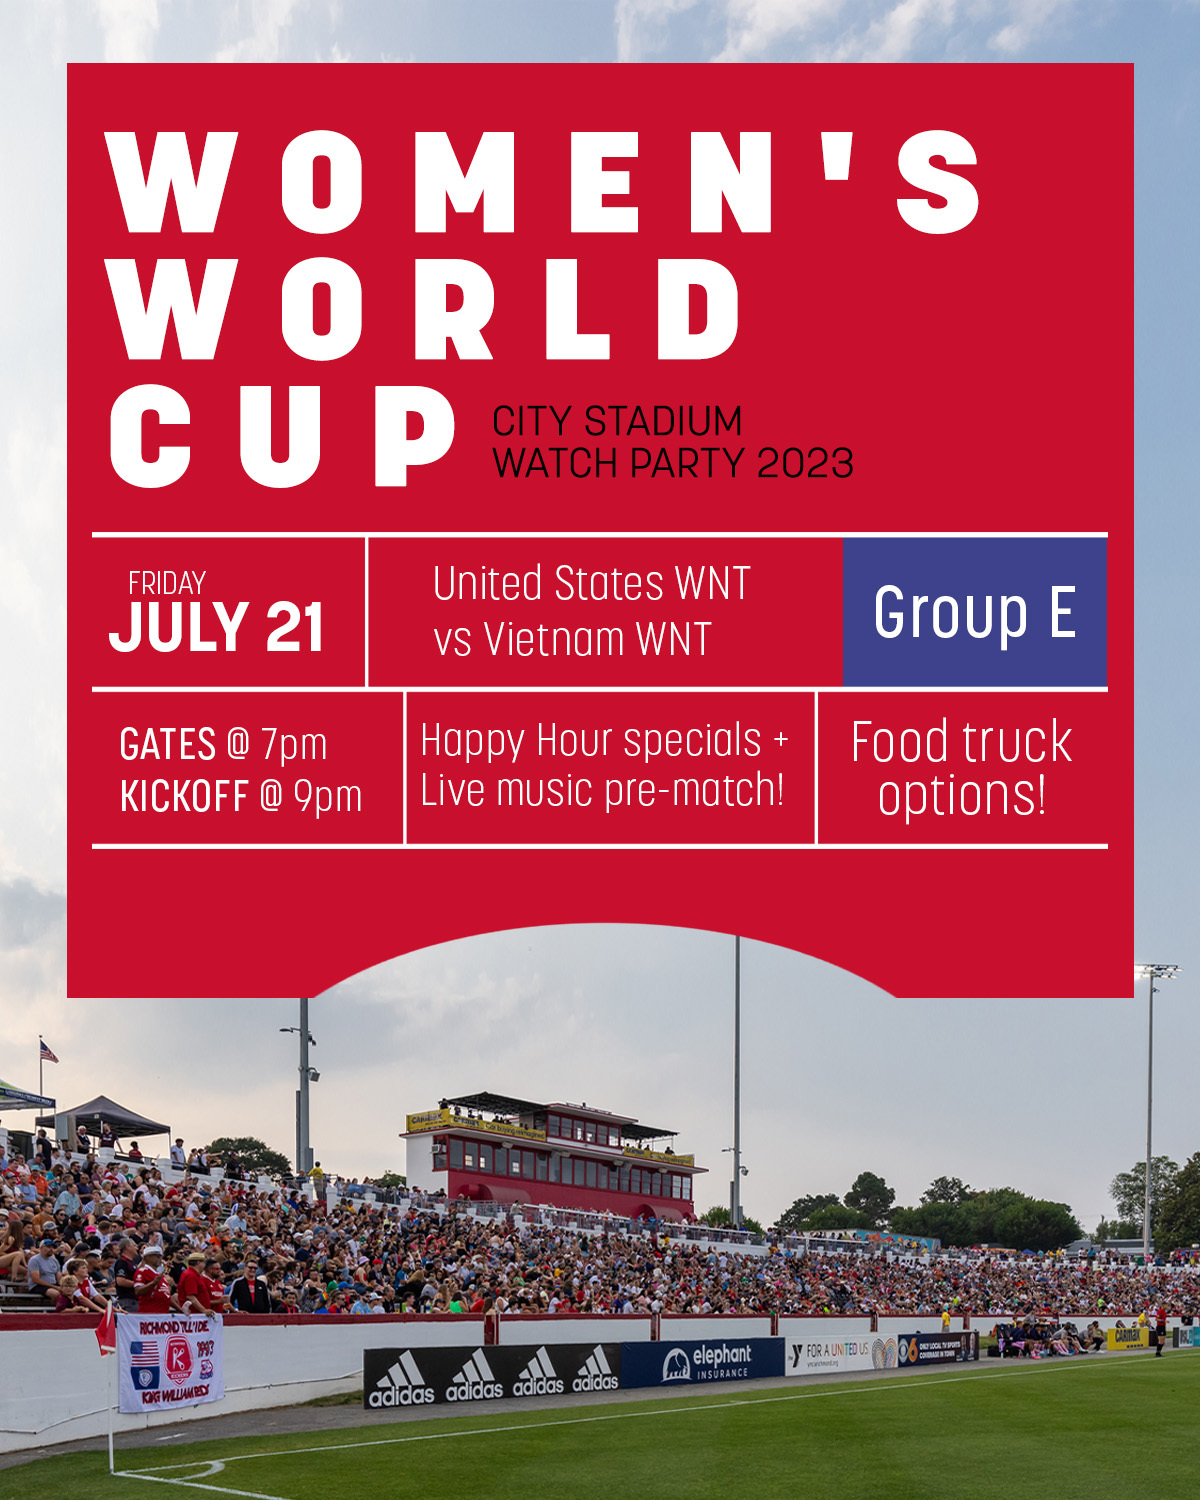 Womens World Cup Watch Party City Stadium